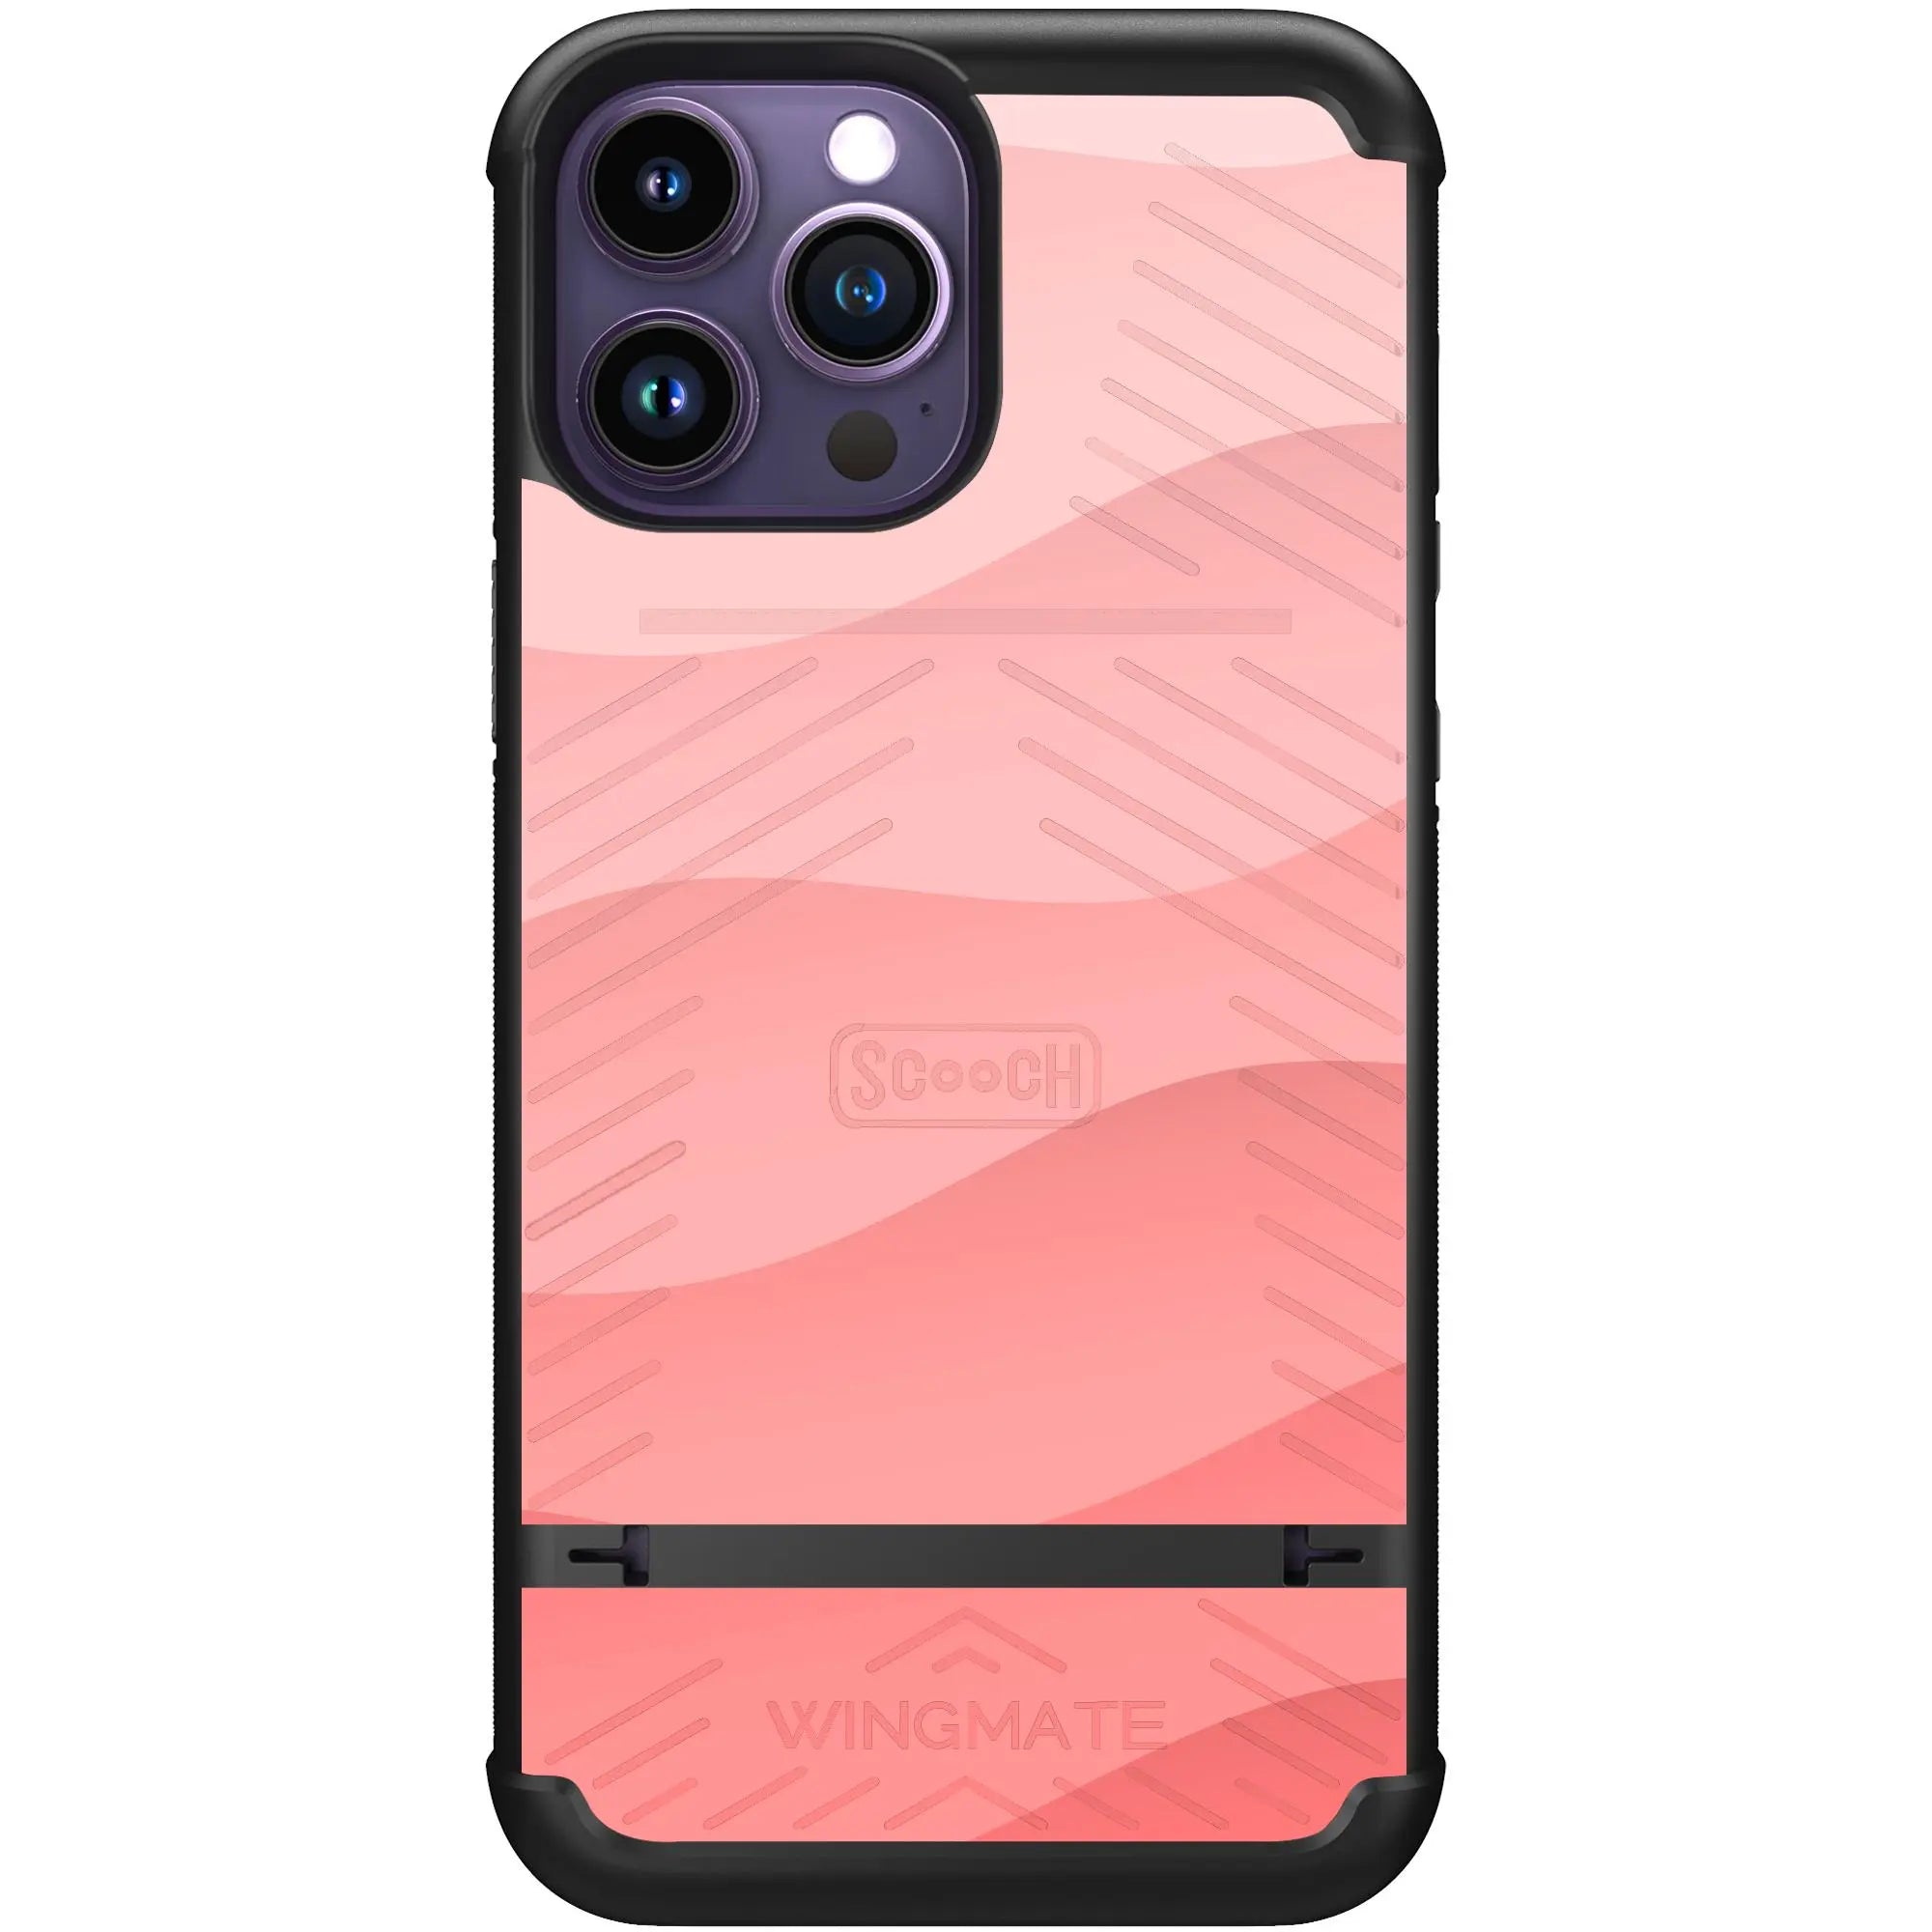 Scooch-Wingmate for iPhone 14 Pro Max-Pink-Waves